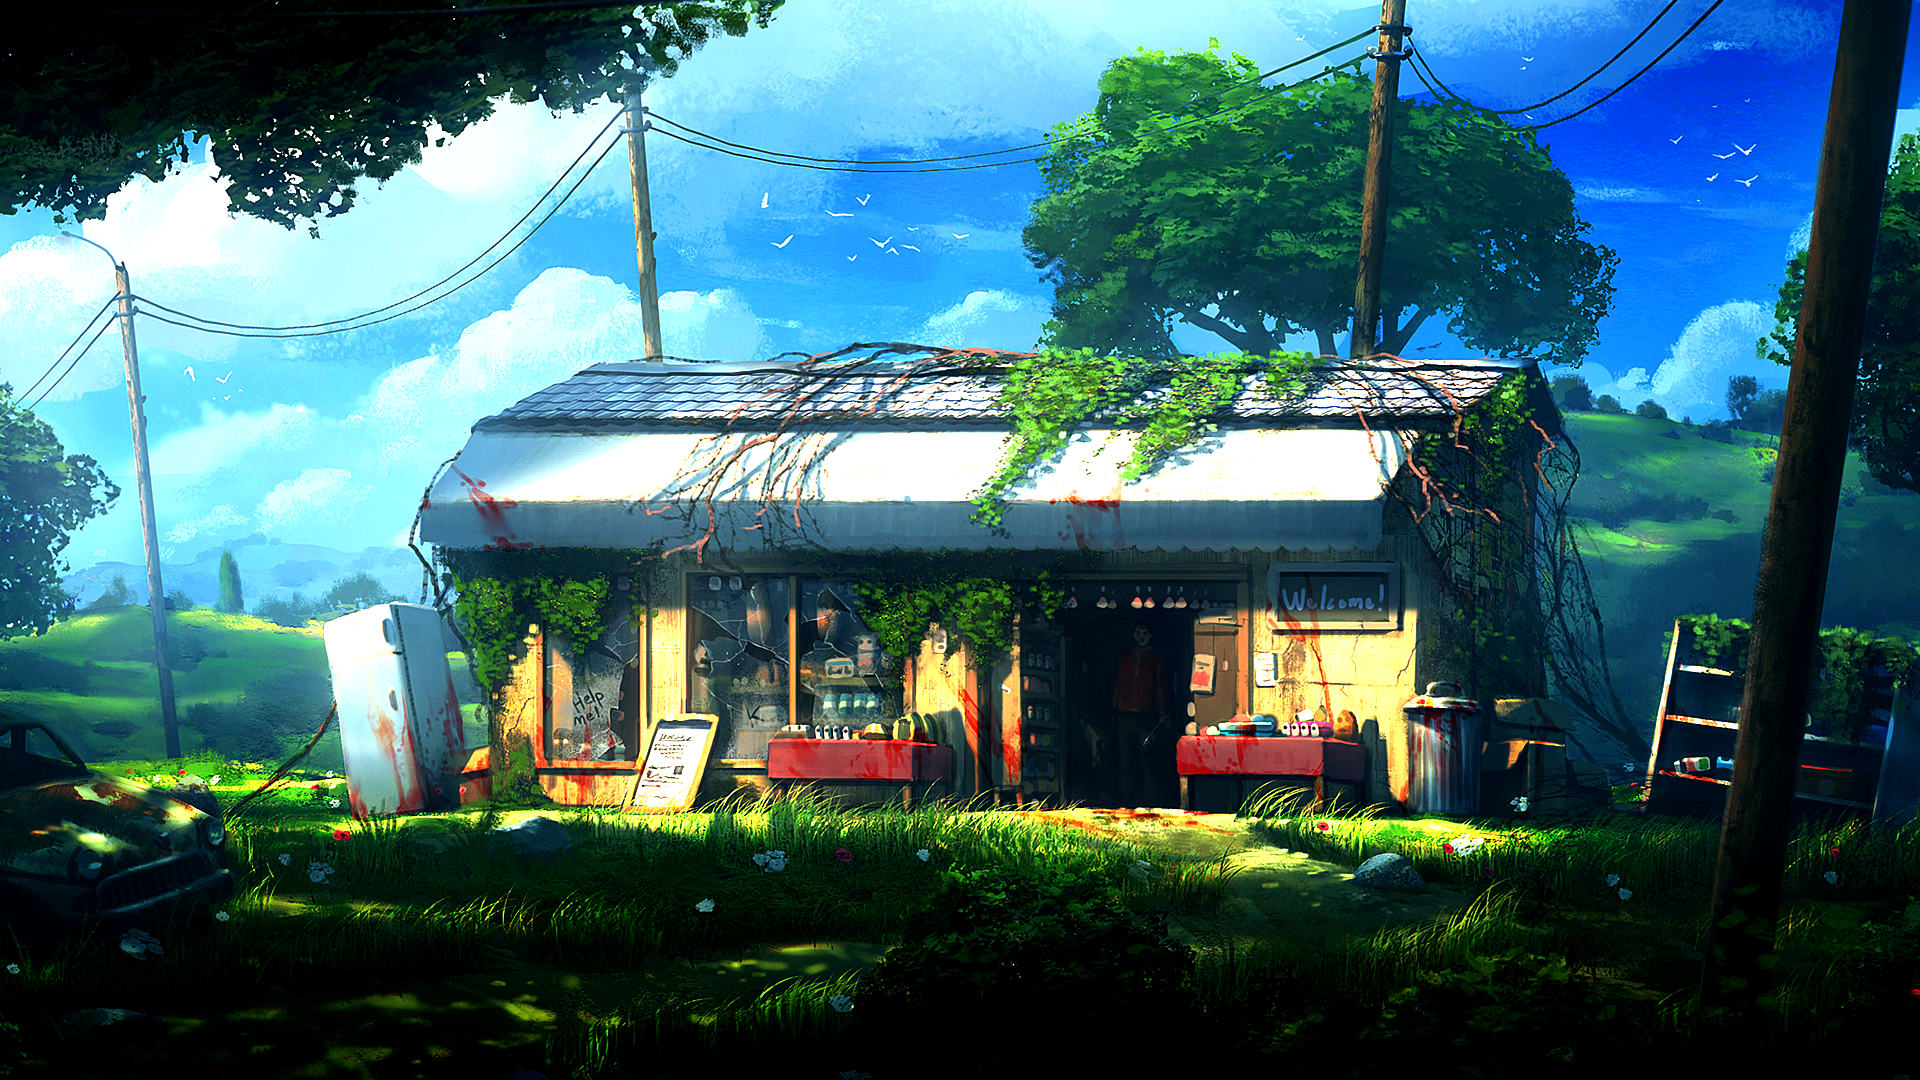 General 1920x1080 artwork nature apocalyptic stores power lines car wreck broken glass building plants trees